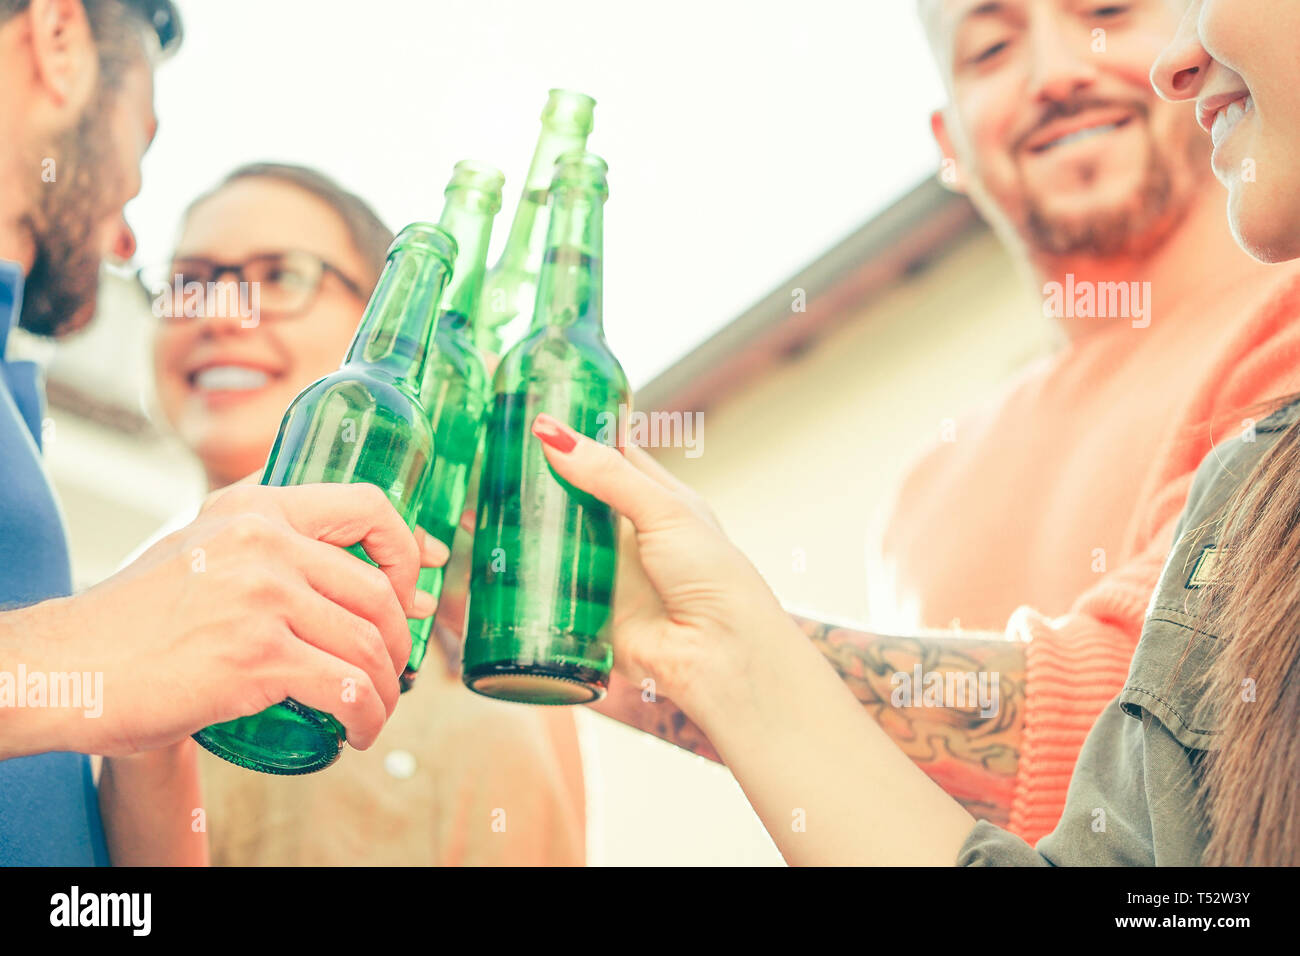 Happy friends toasting beers outdoor - Young people having fun cheering and drinking alcohol at rooftop - Friendship, youth, lifestyle concept Stock Photo